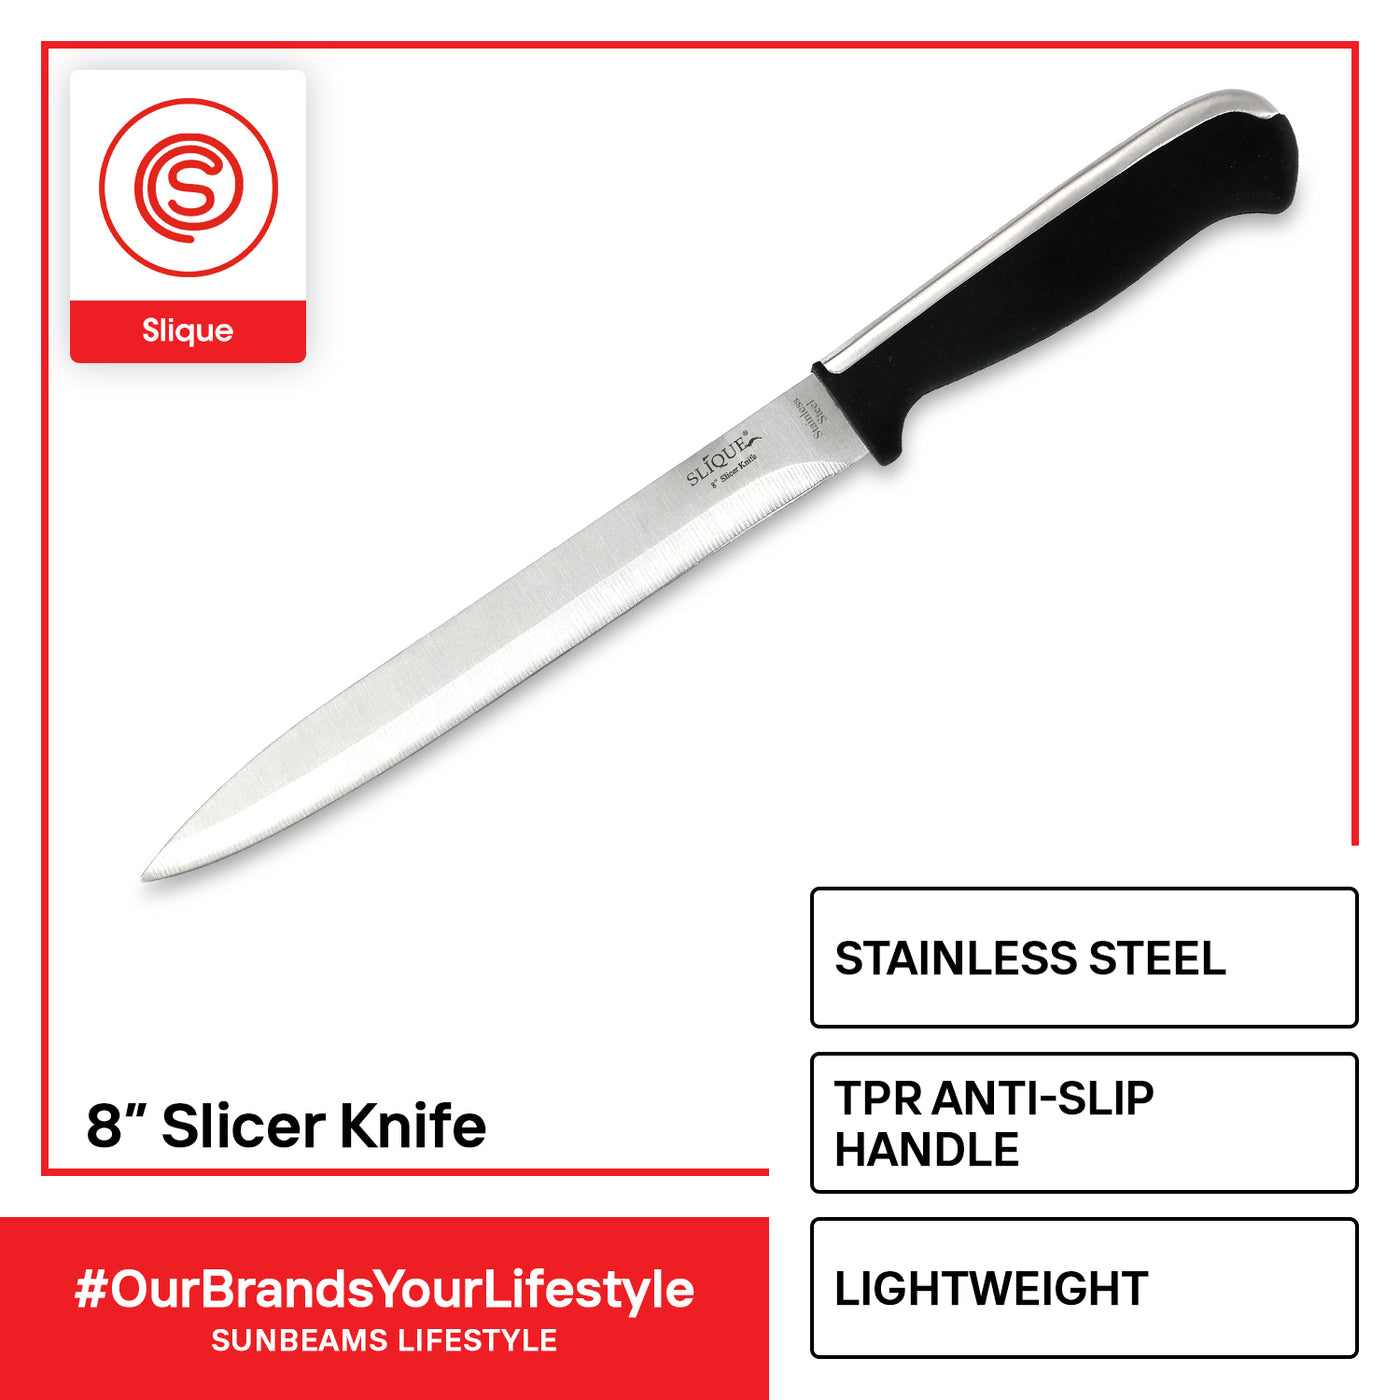 SLIQUE Premium Stainless Steel Slicer Knife 8 inches